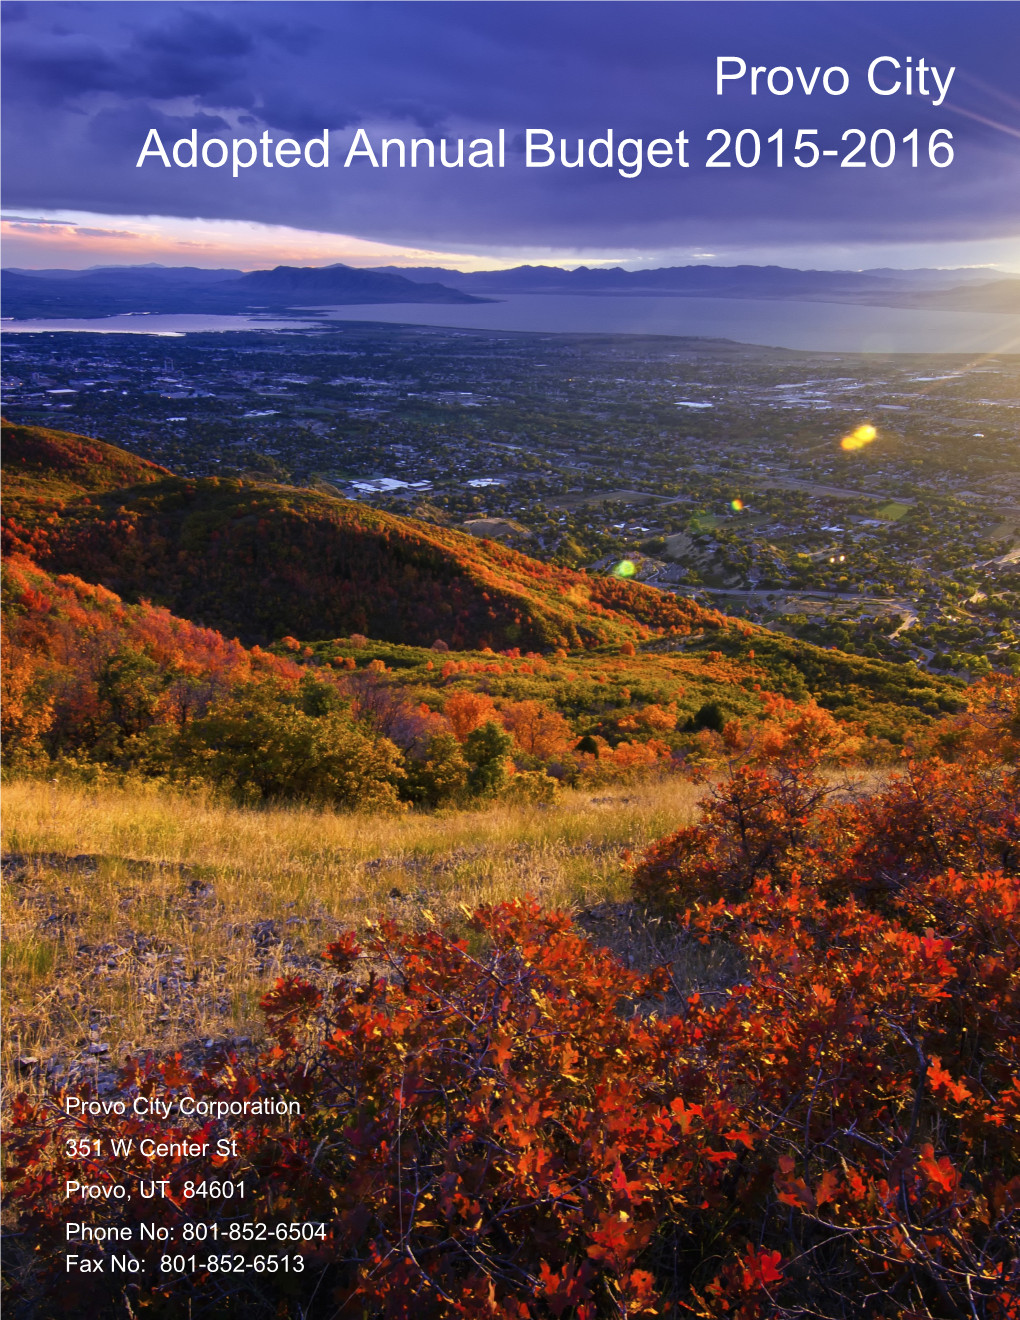 Provo City Adopted Annual Budget 2015-2016